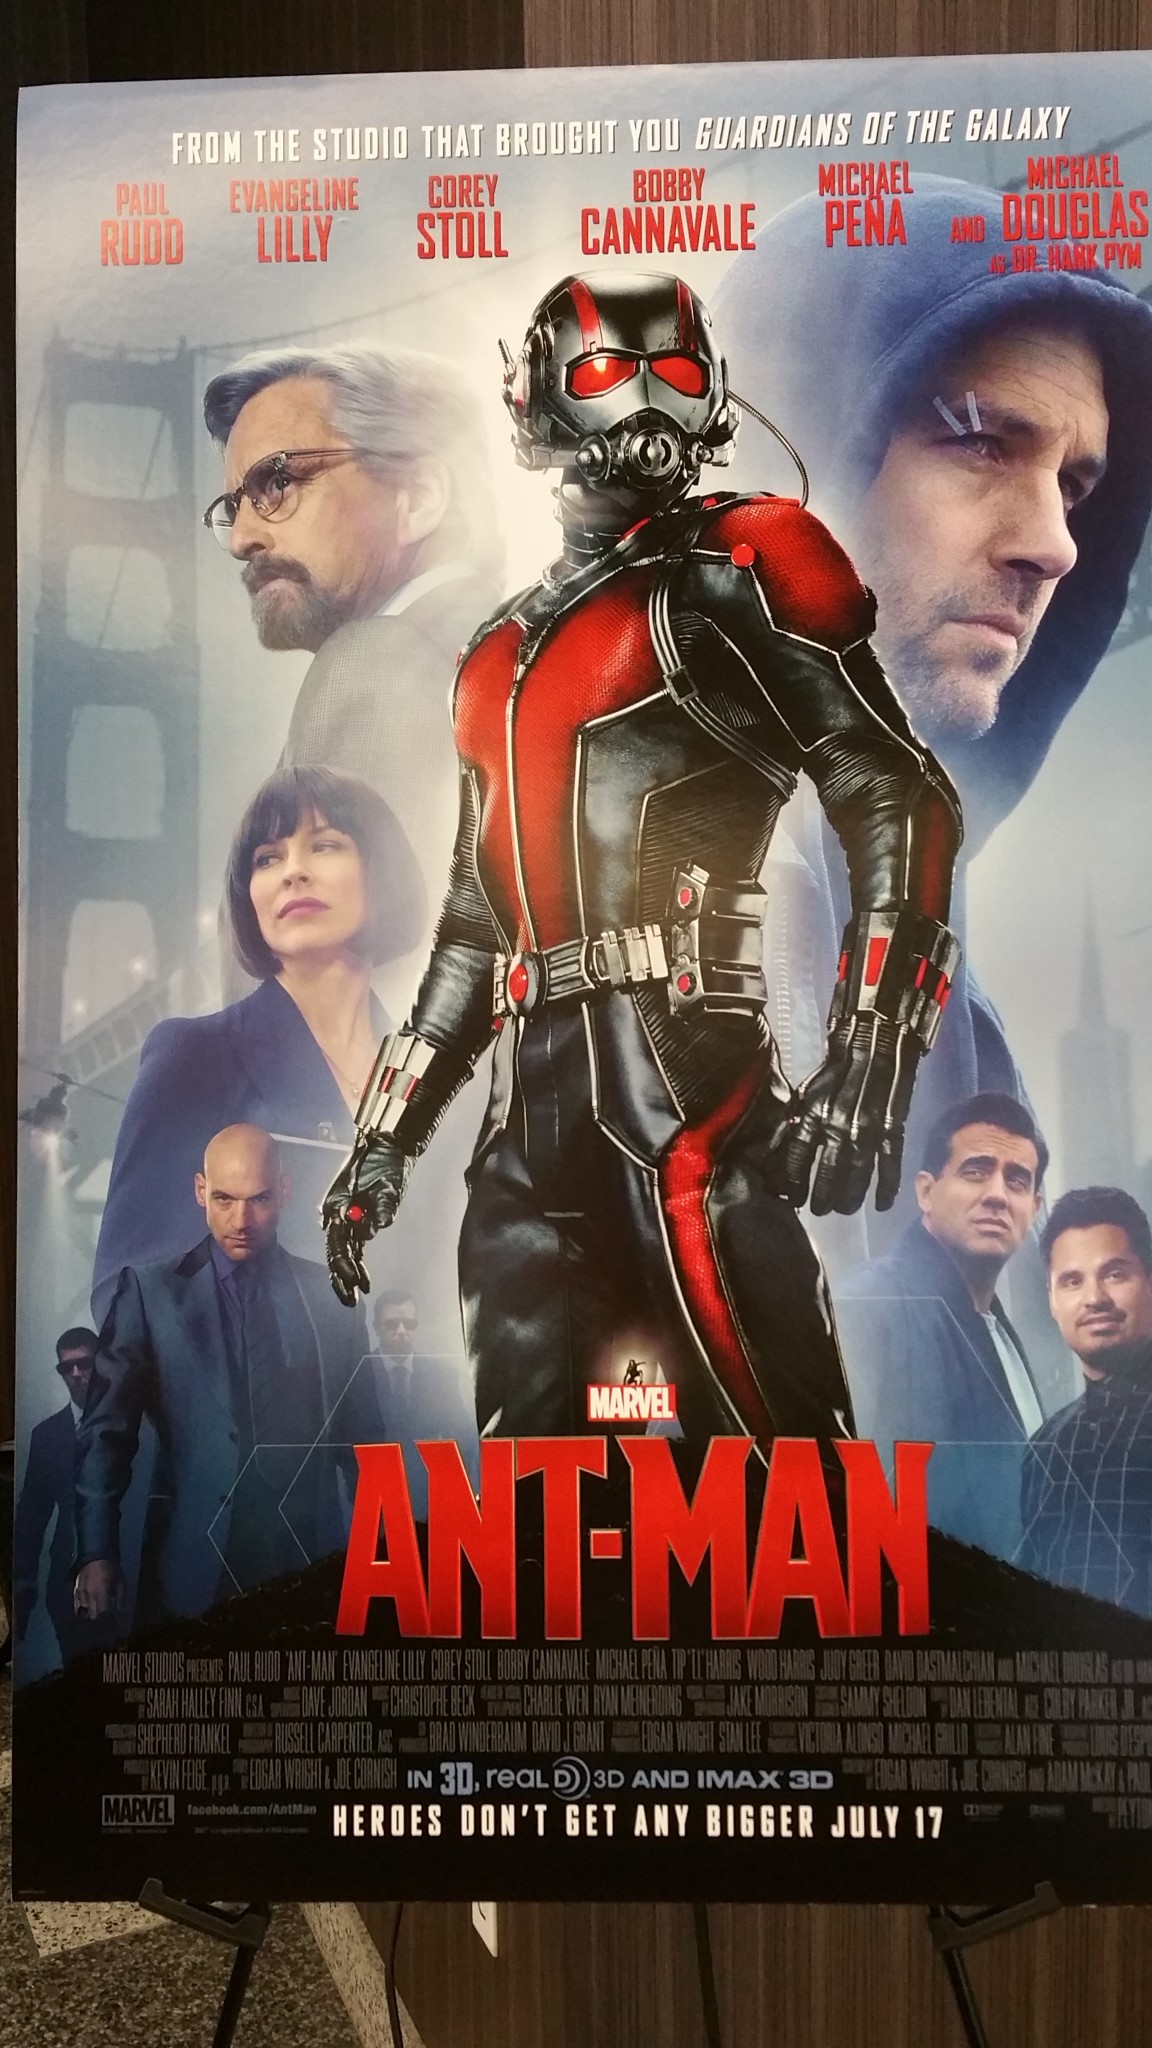 Don’t Miss The Hollywood Premiere of “Ant-Man”